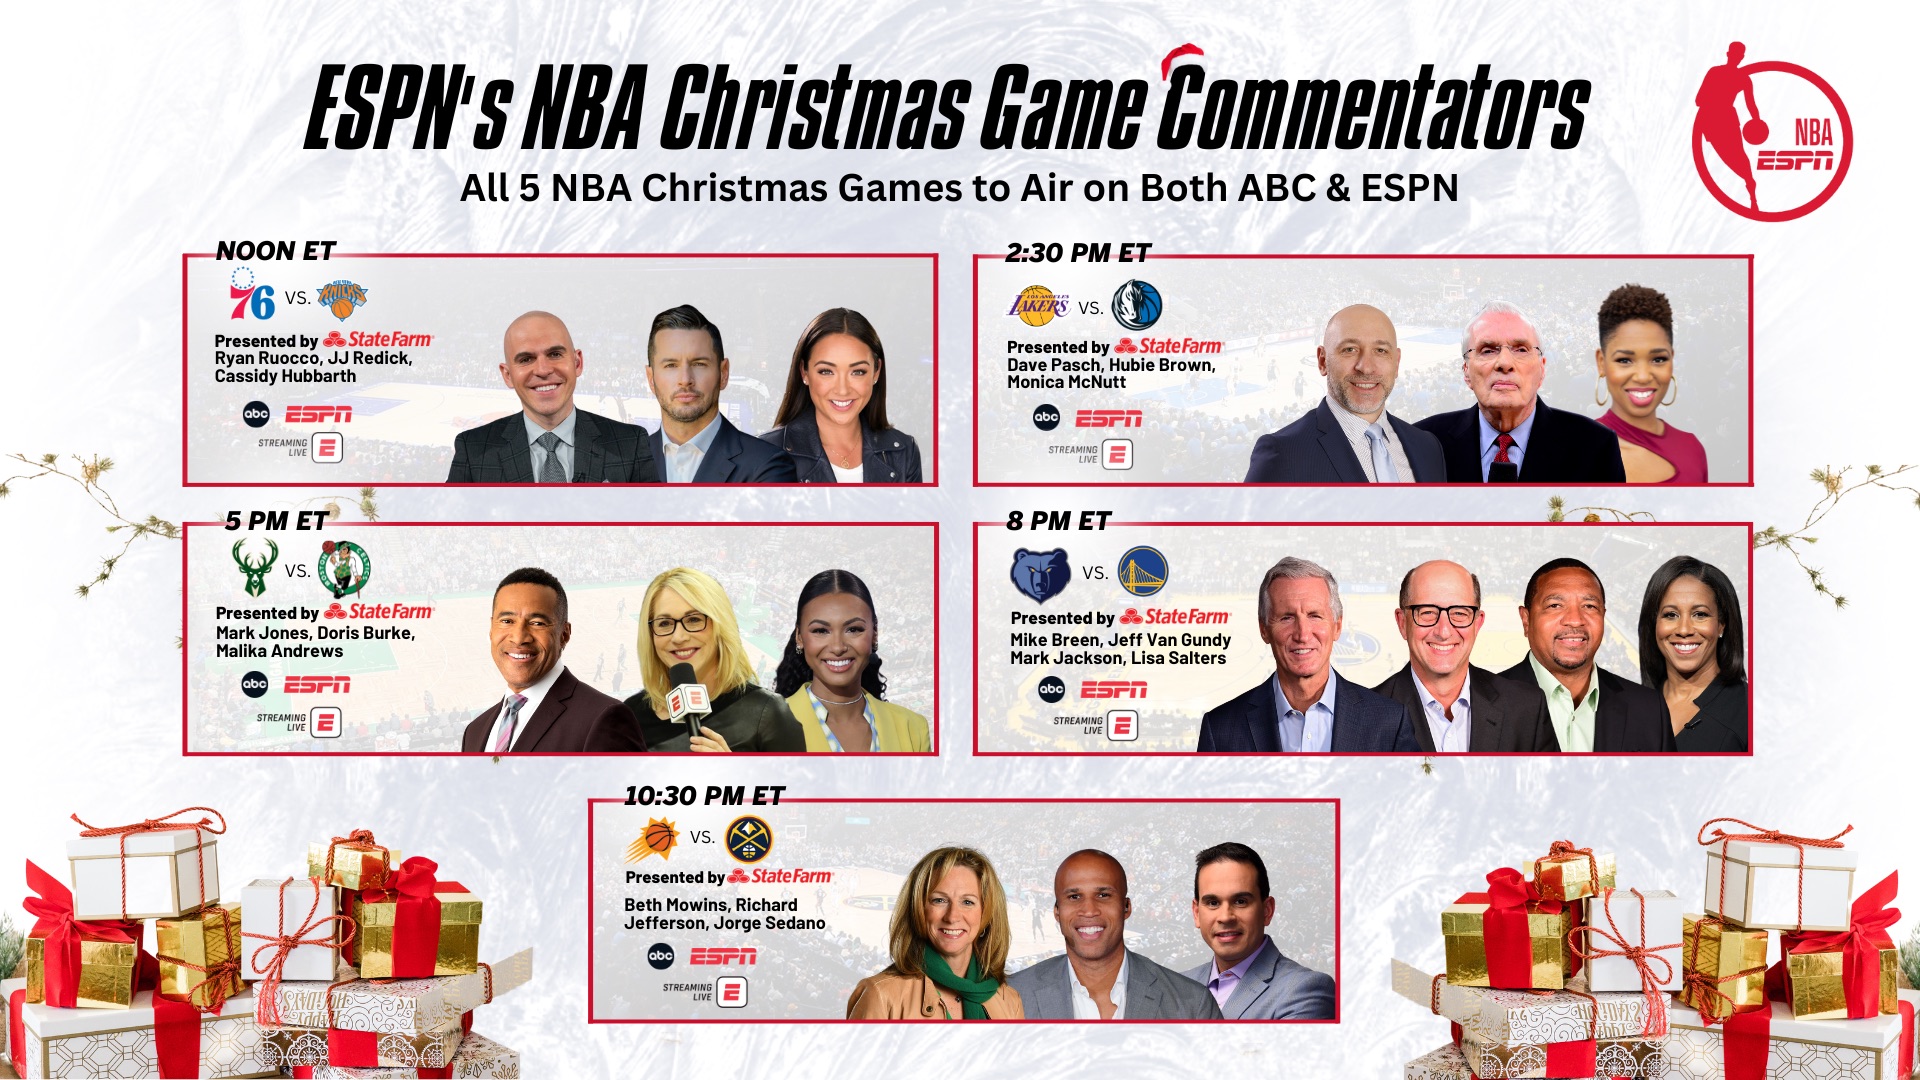 NBA Christmas Day 2022 - Schedule, how to watch/stream games - ESPN